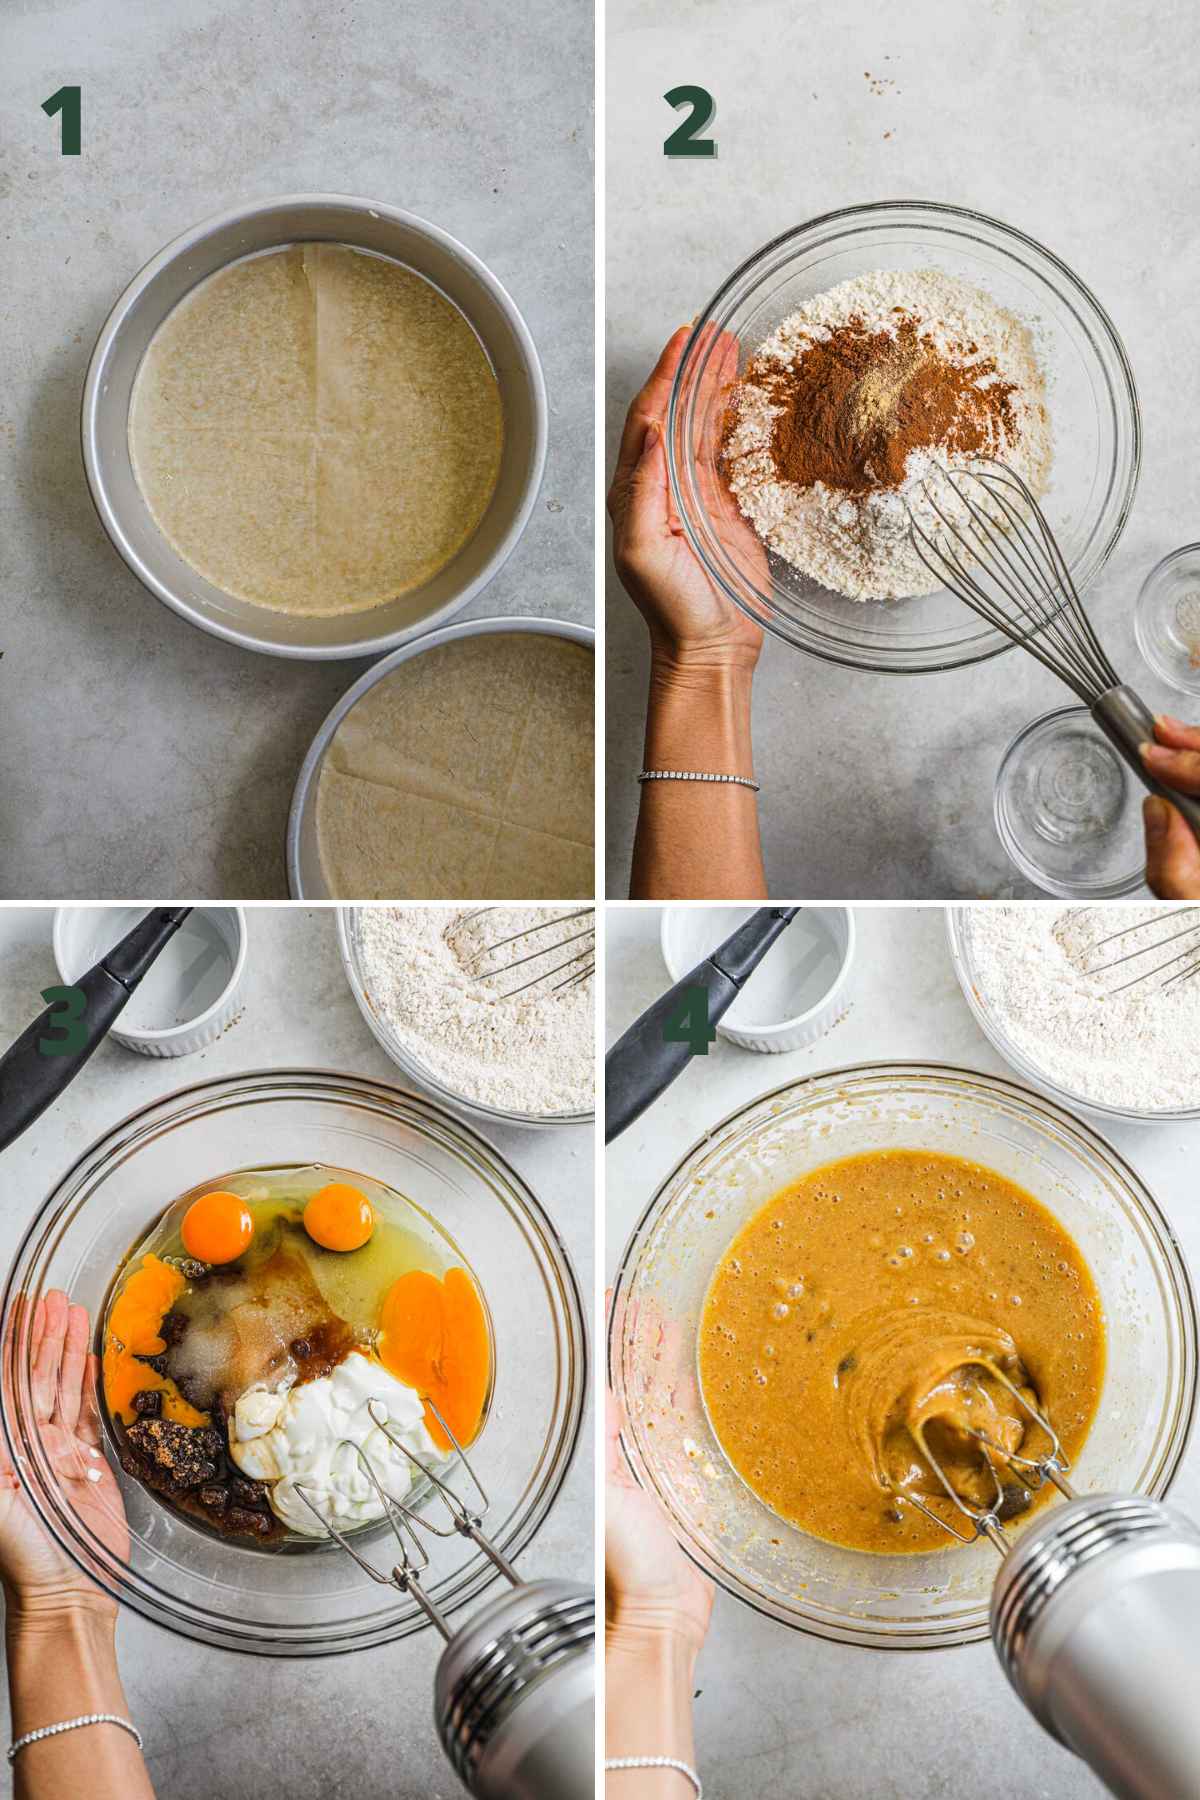 Steps to make carrot cake, line cake pans with parchment paper, whisk flour, spice, and dry ingredients; whisk wet ingredients and sugar, eggs, greek yogurt, oil.